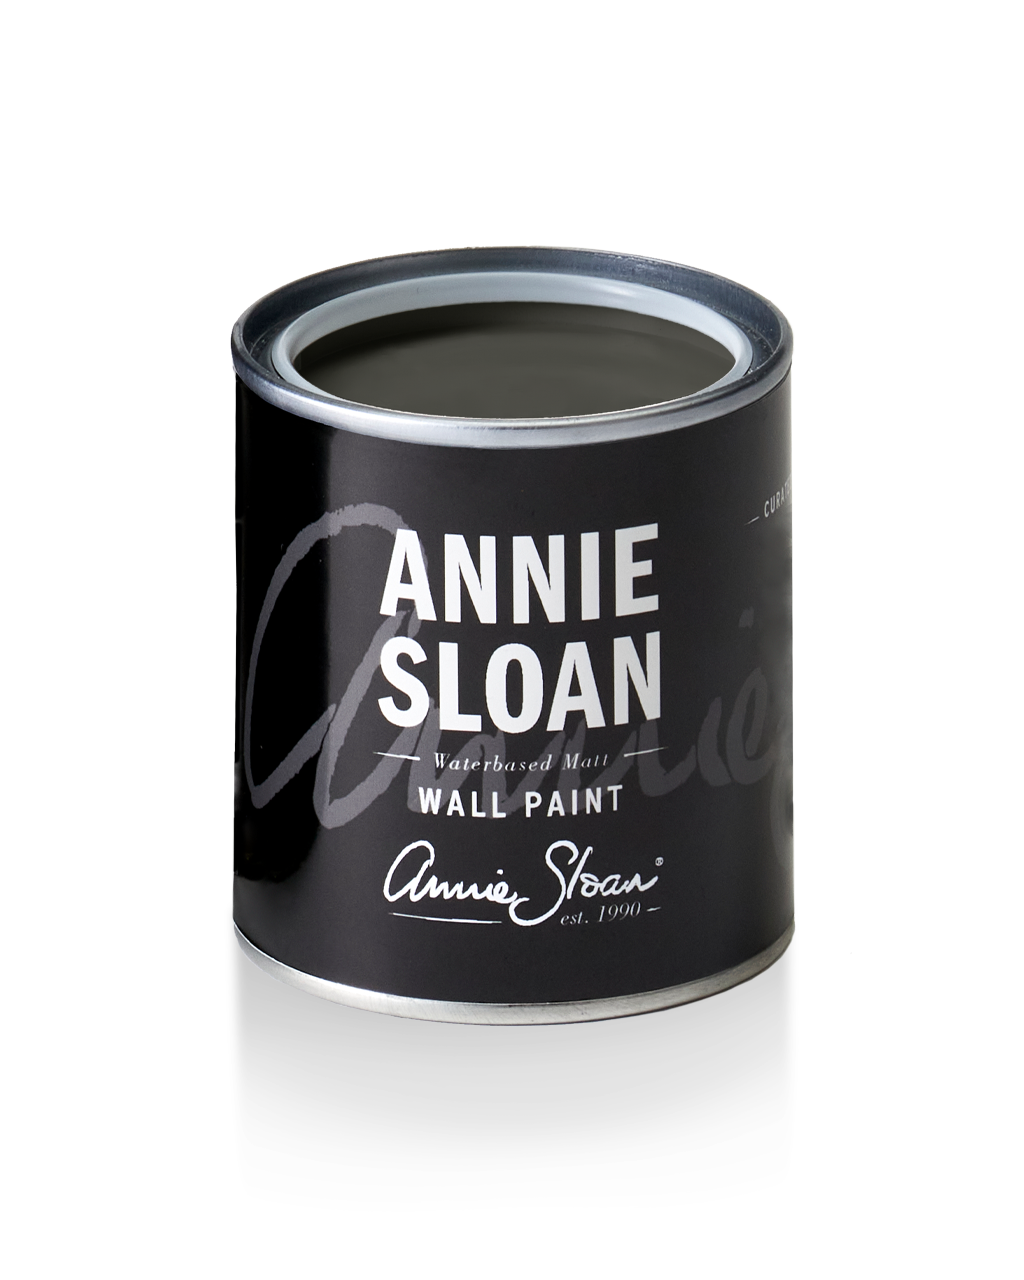 120ml of Annie Sloan wall paint in Graphite